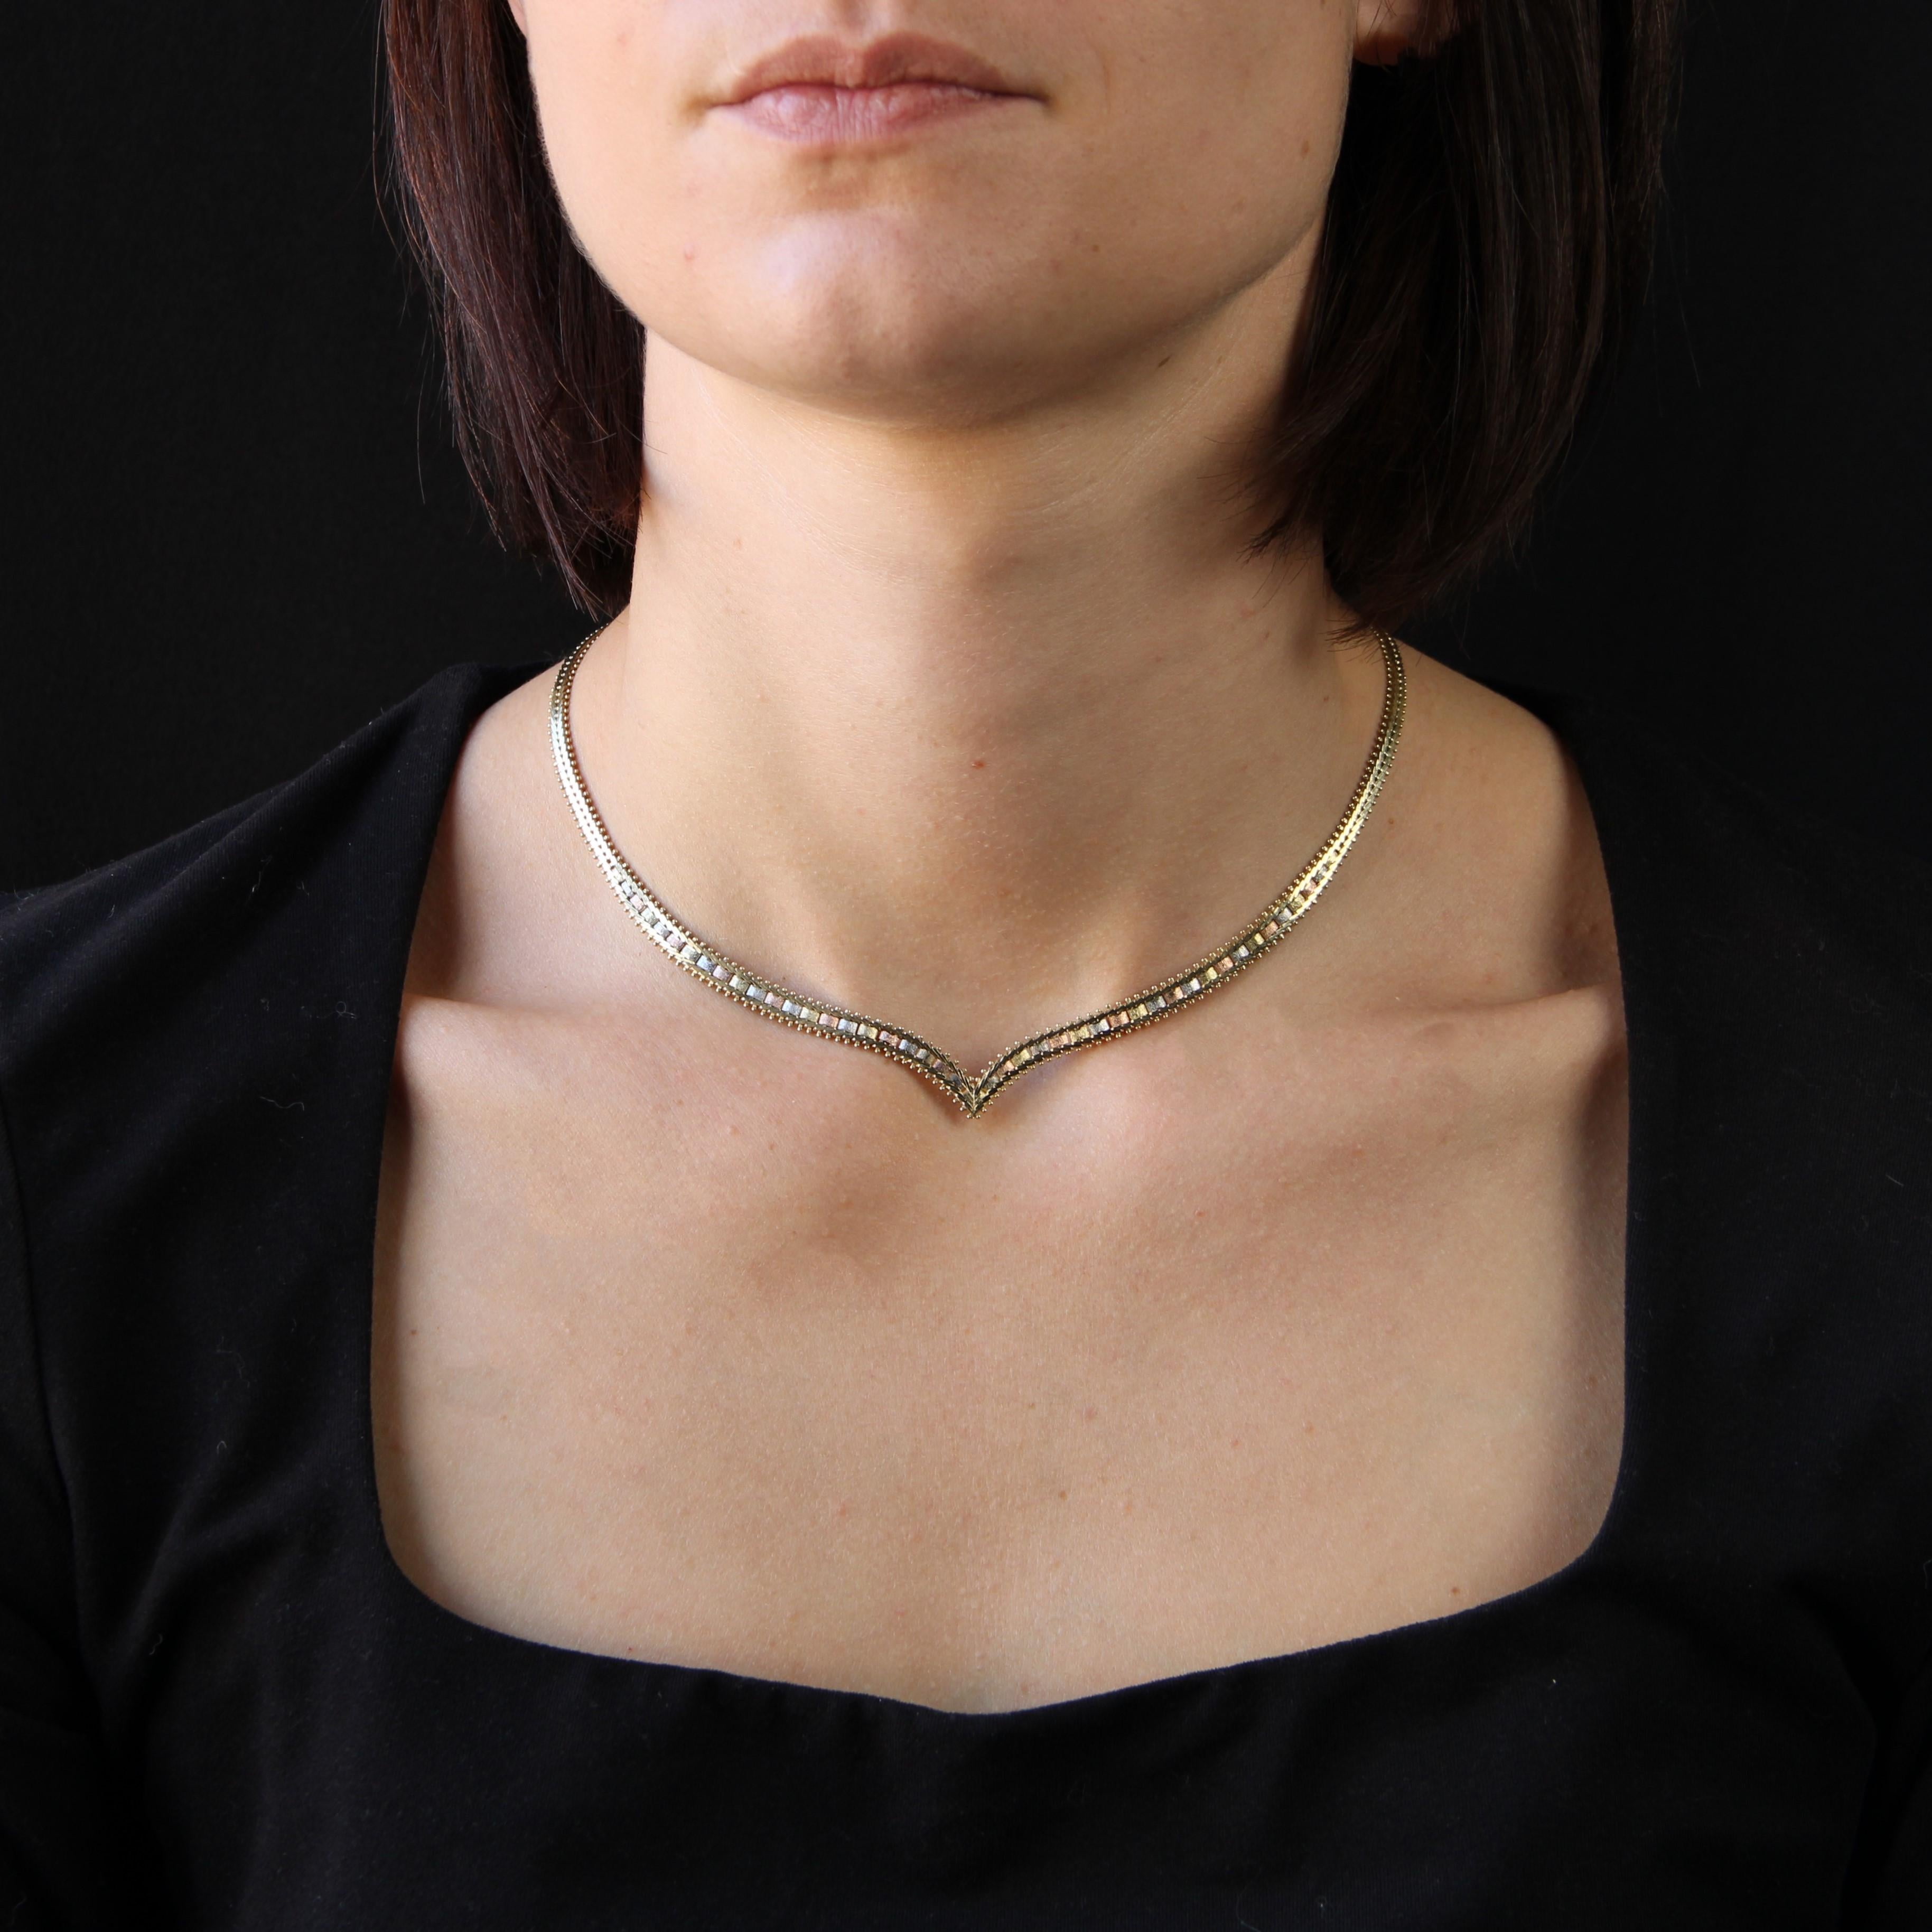 Necklace in 14 karat yellow, rose and grey gold.
This choker necklace features an articulated V-shaped mesh, decorated on the front with alternating 3-color gold clasps and a brushed finish. The mesh forms a V-shape on the front. The clasp is